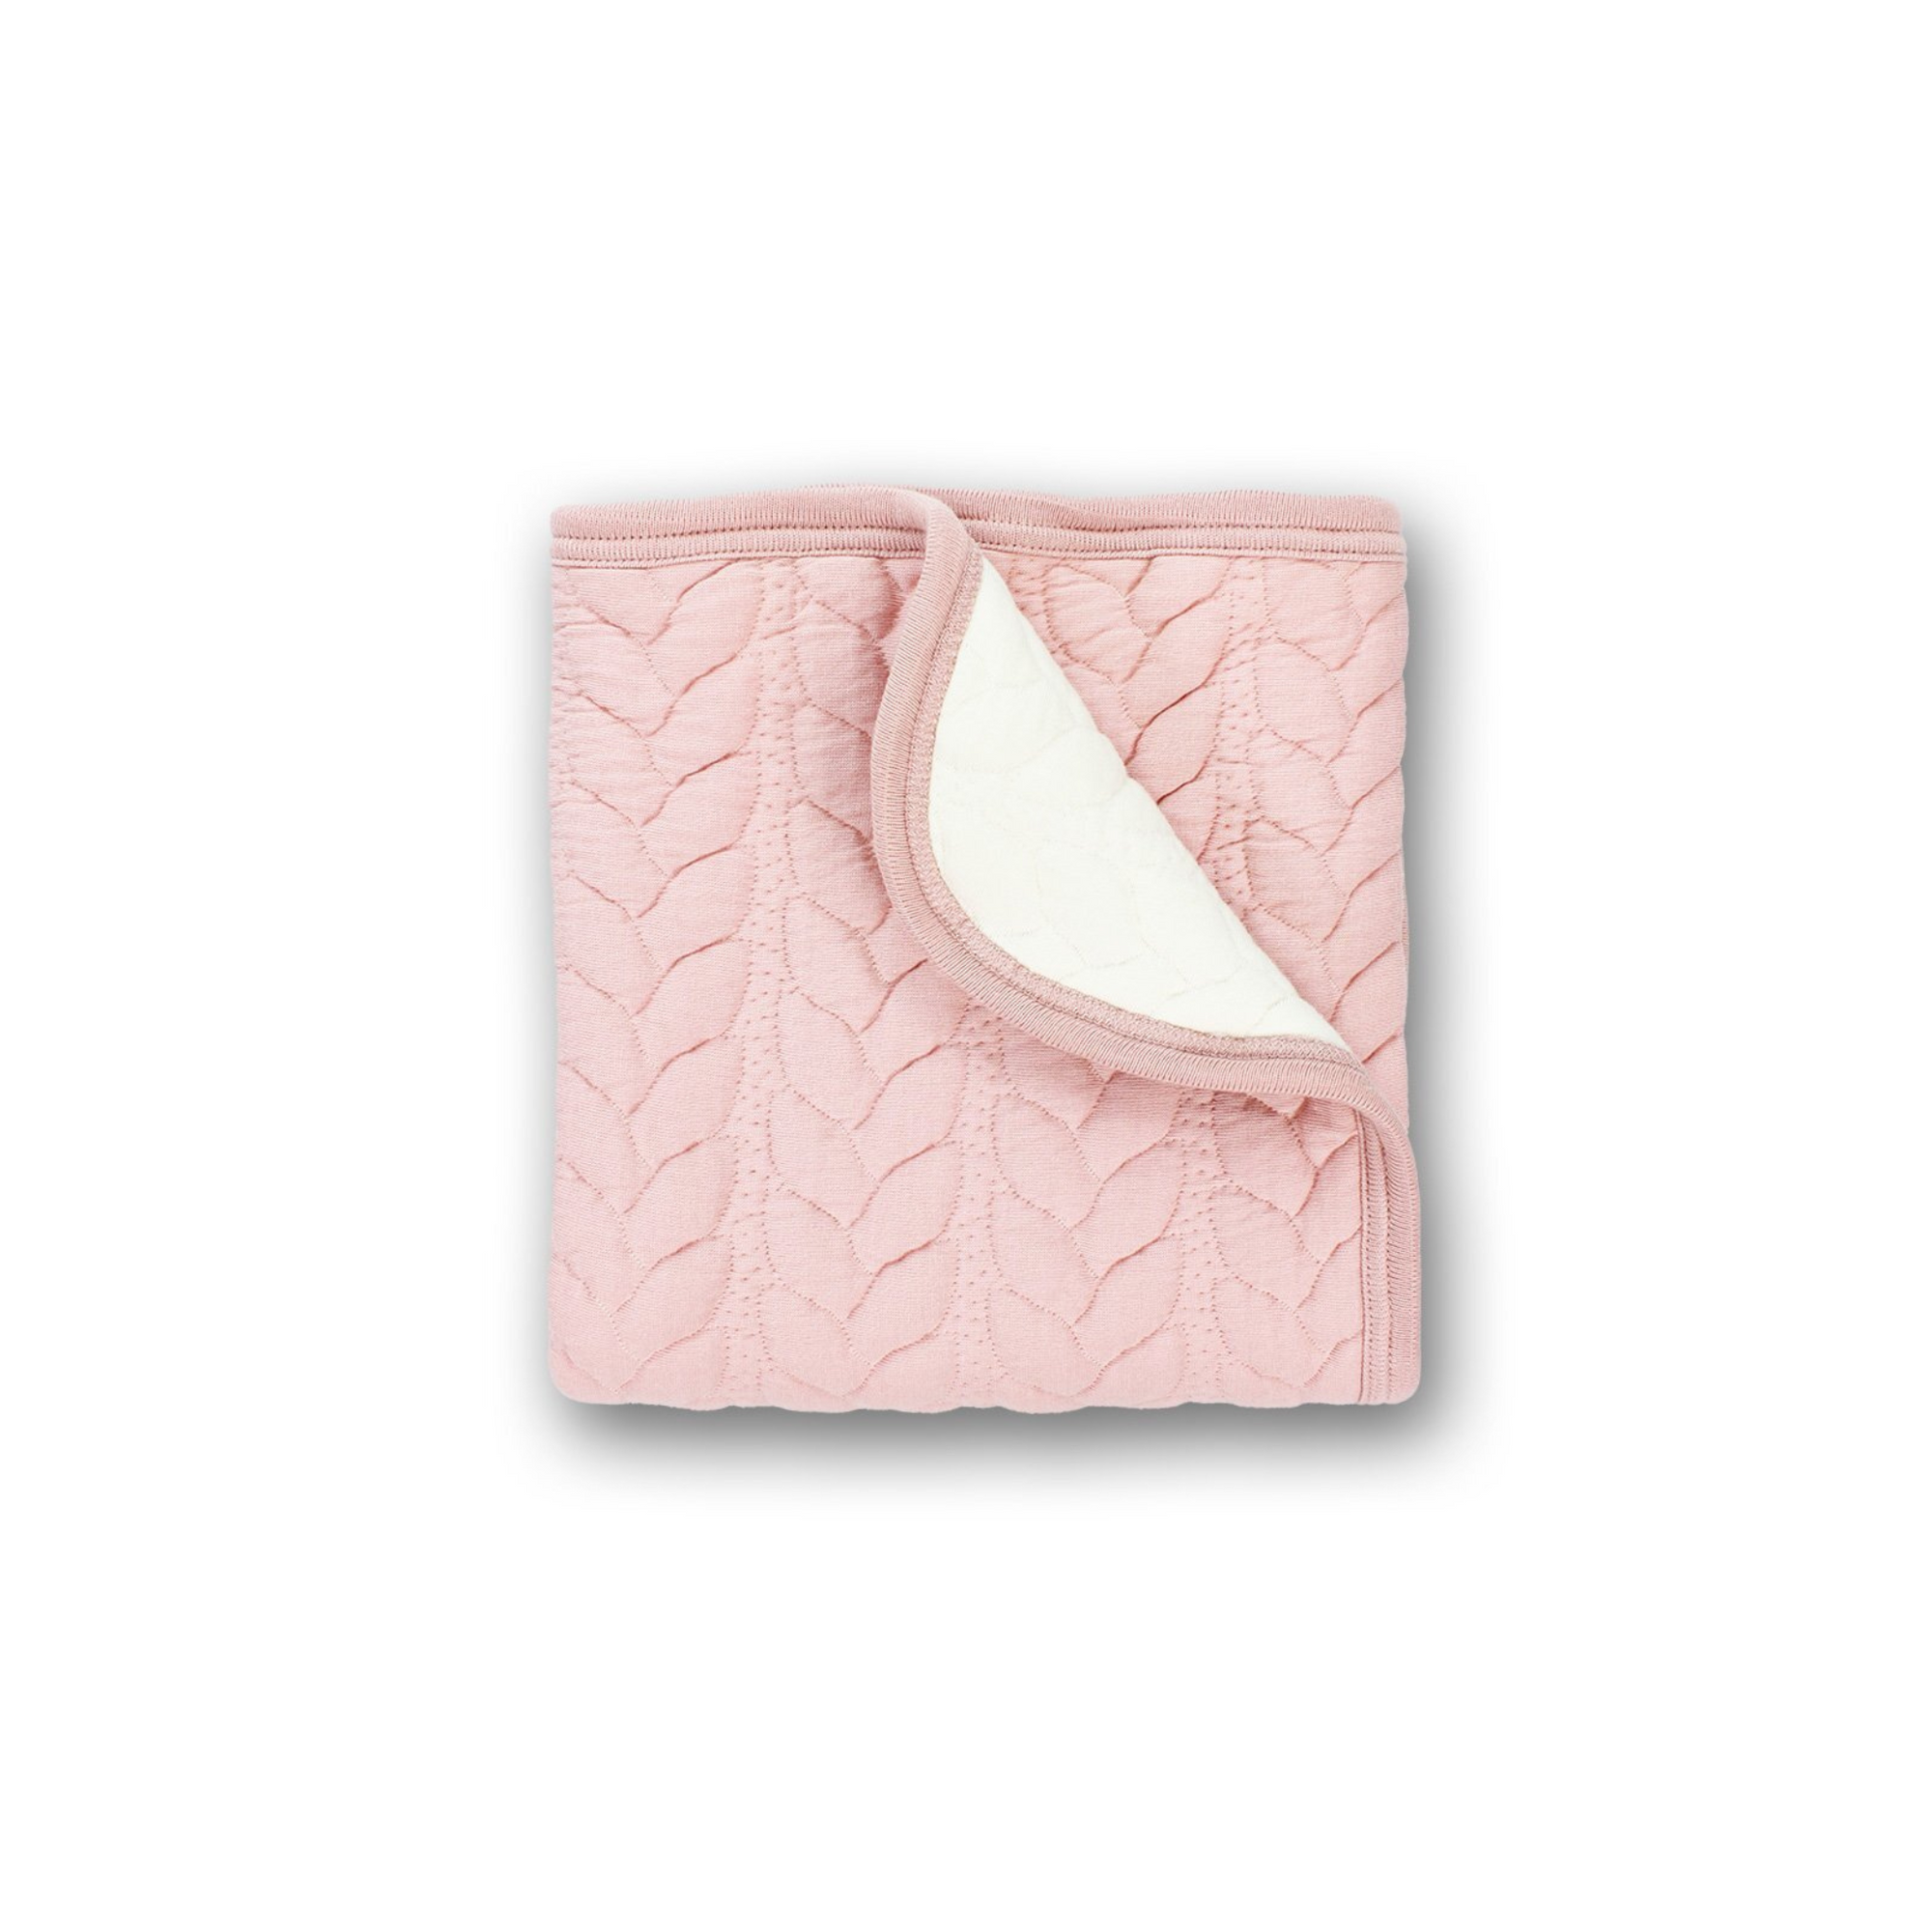 Dlux Quilted Reversible Blanket - Pink